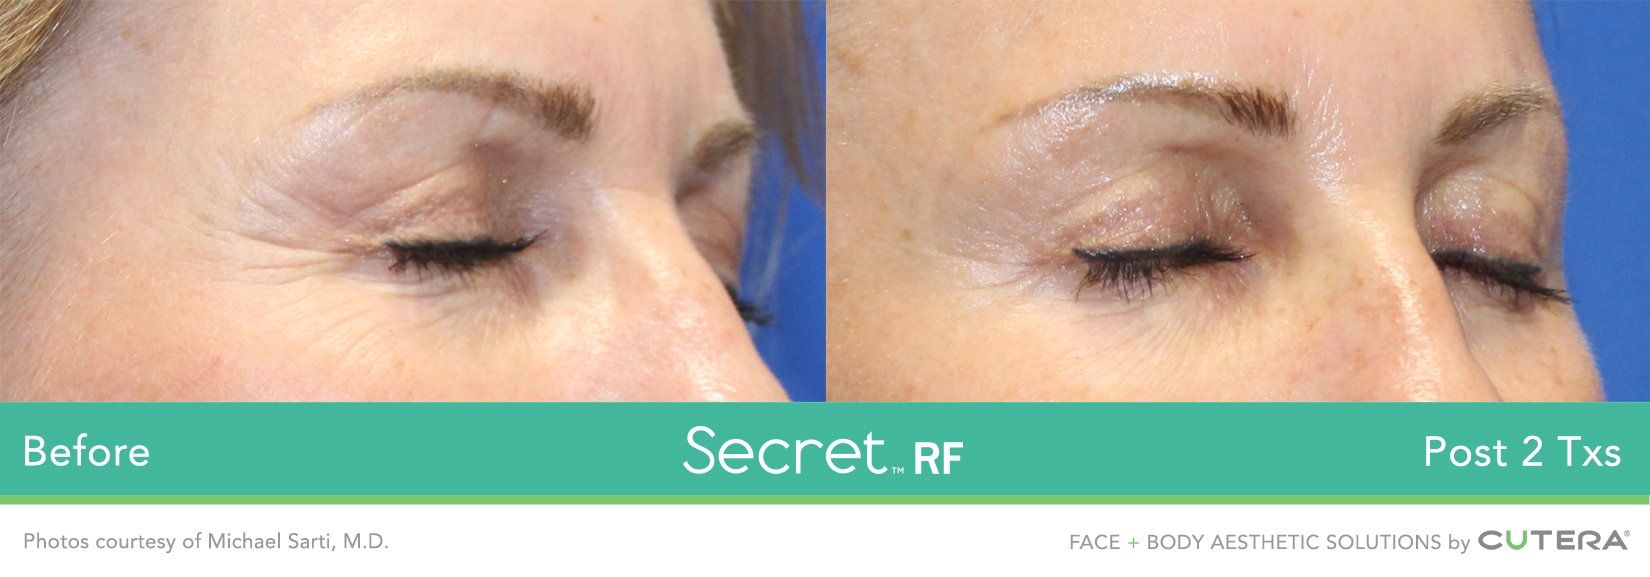 Secret RF Before and After